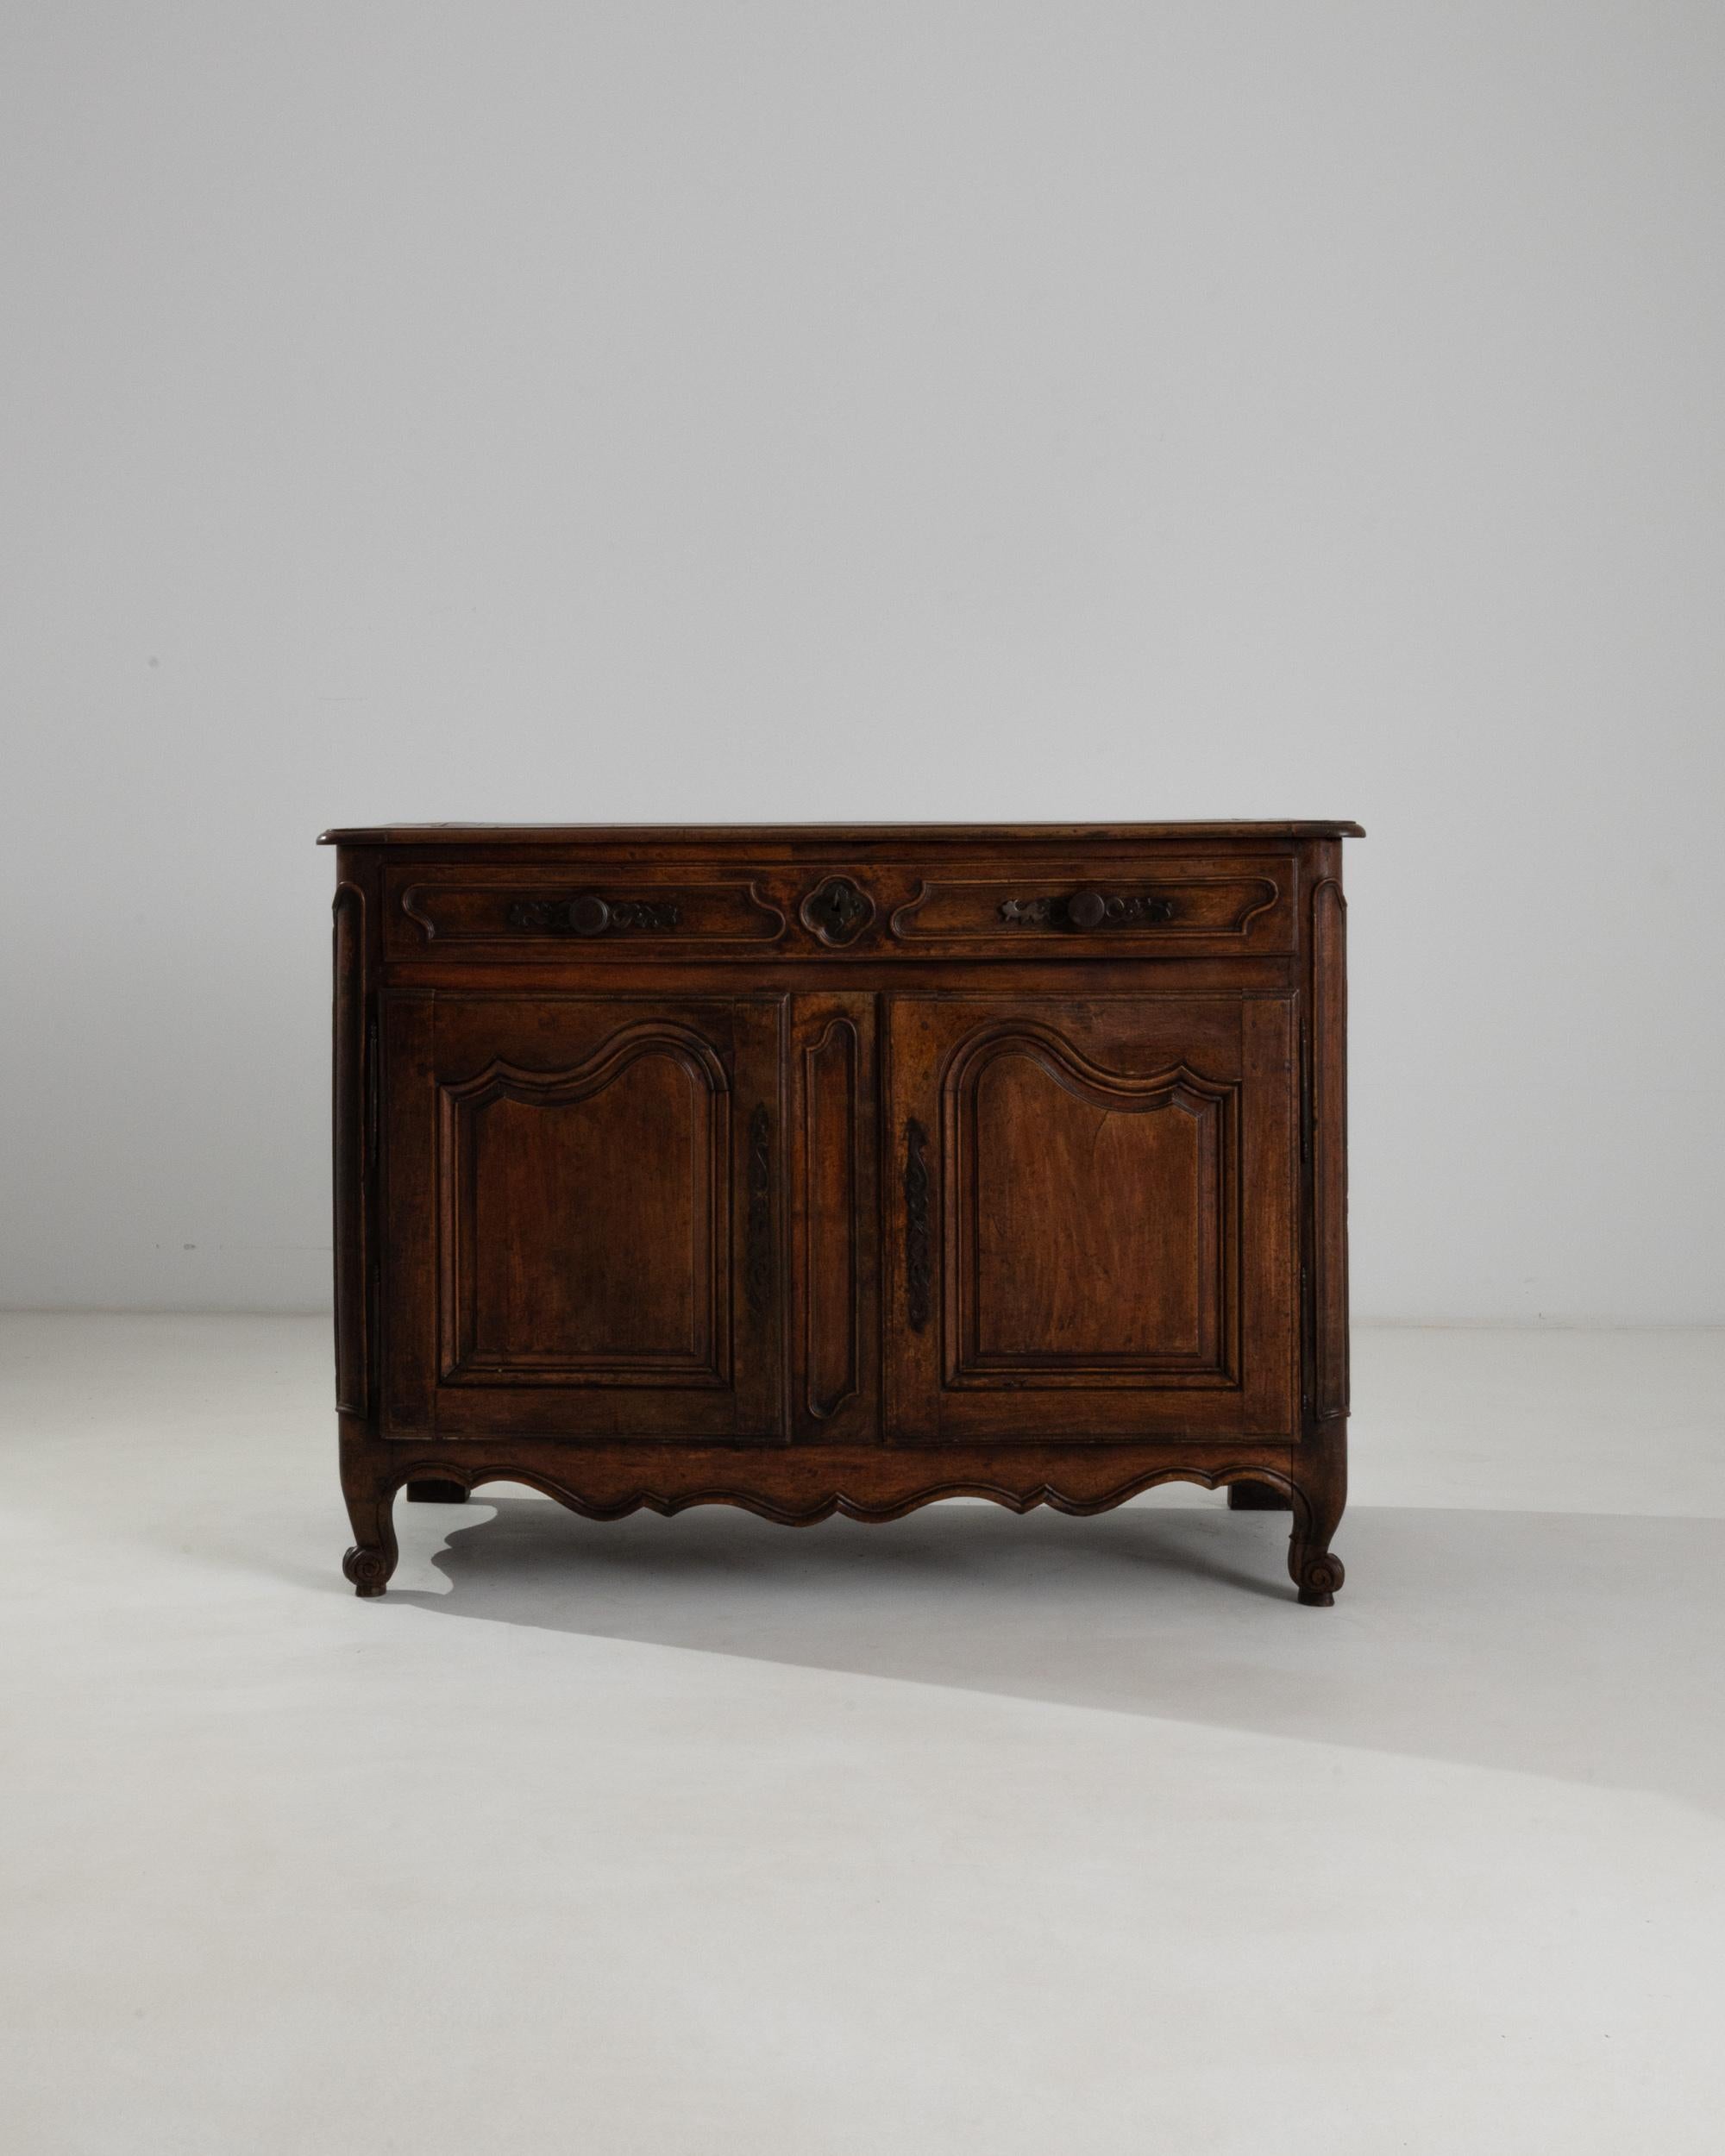 The patina of this antique buffet glows with a warmth and richness that can only be attained from the passing of time. Made in 19th century France, the polished surface of the wood has aged to a dark caramel hue with notes of deep garnet and cherry